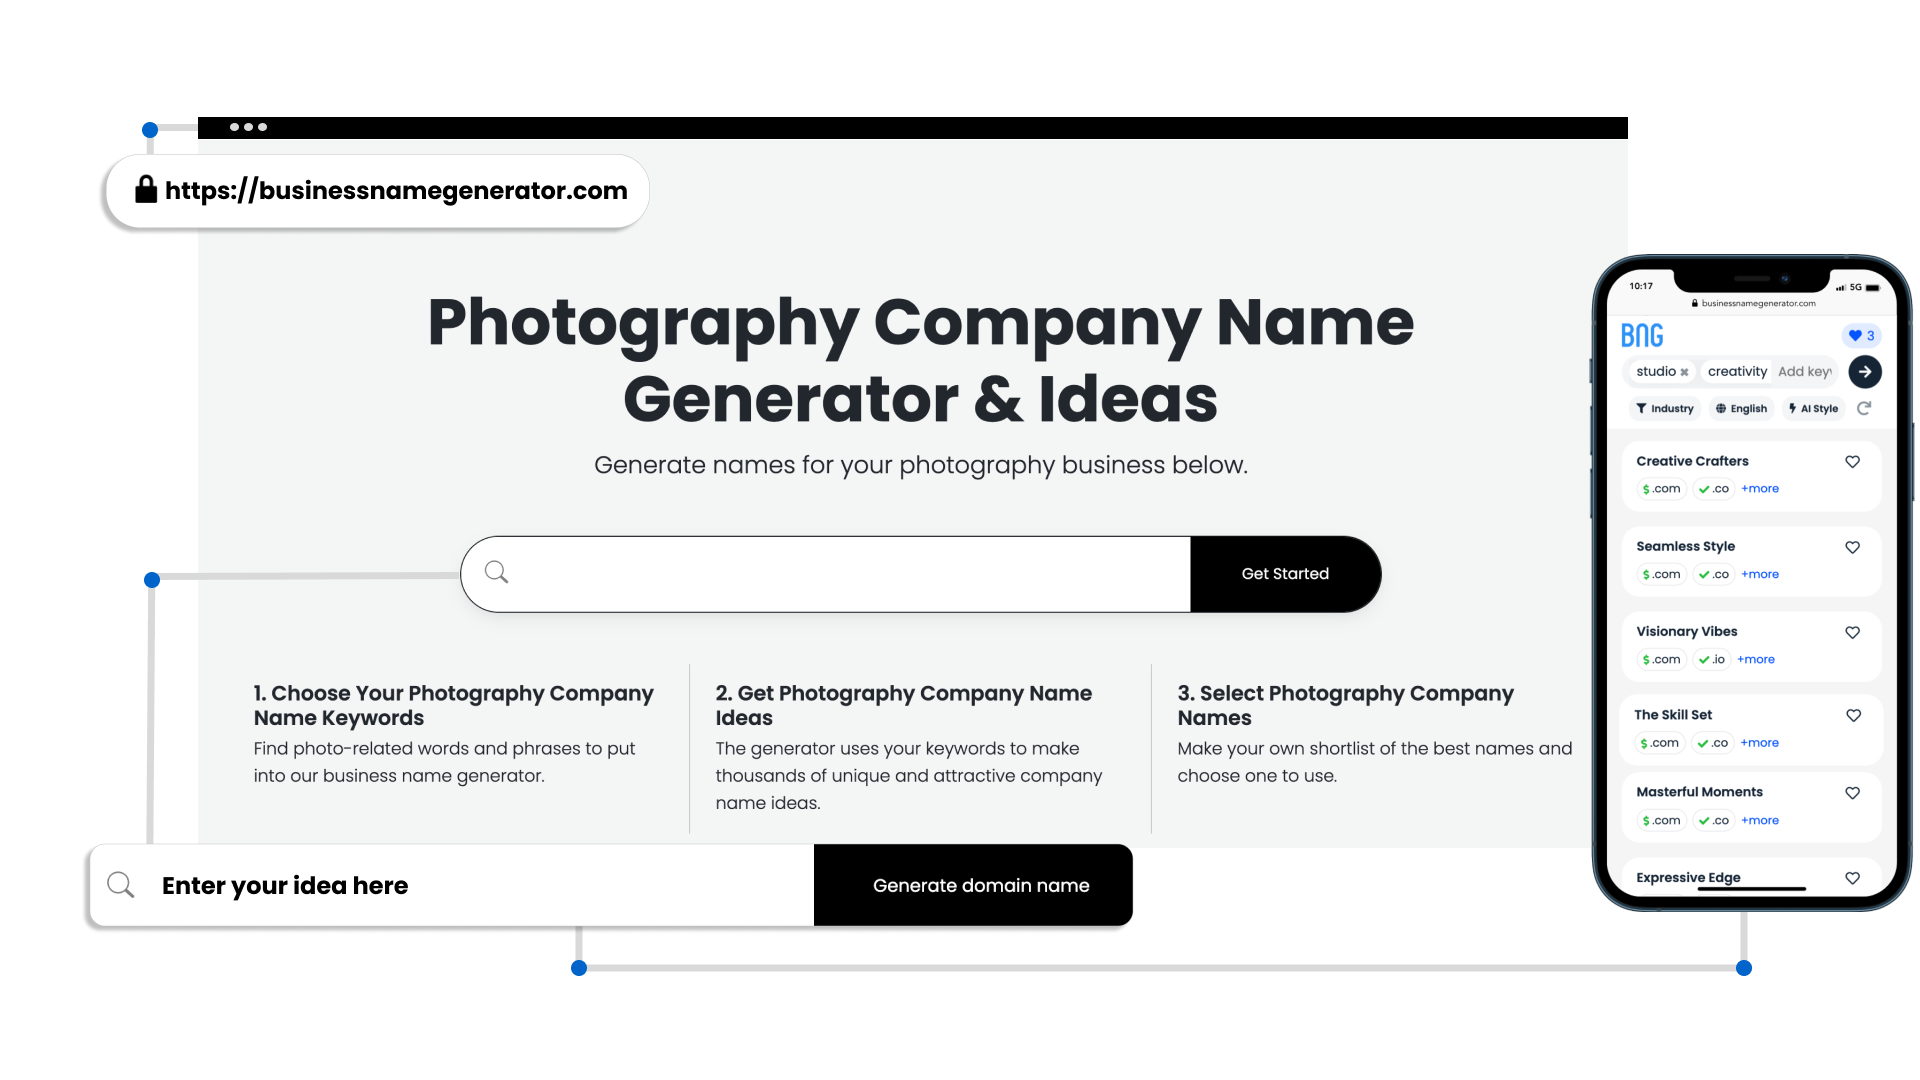 Benefits of Our Photography Name Generator